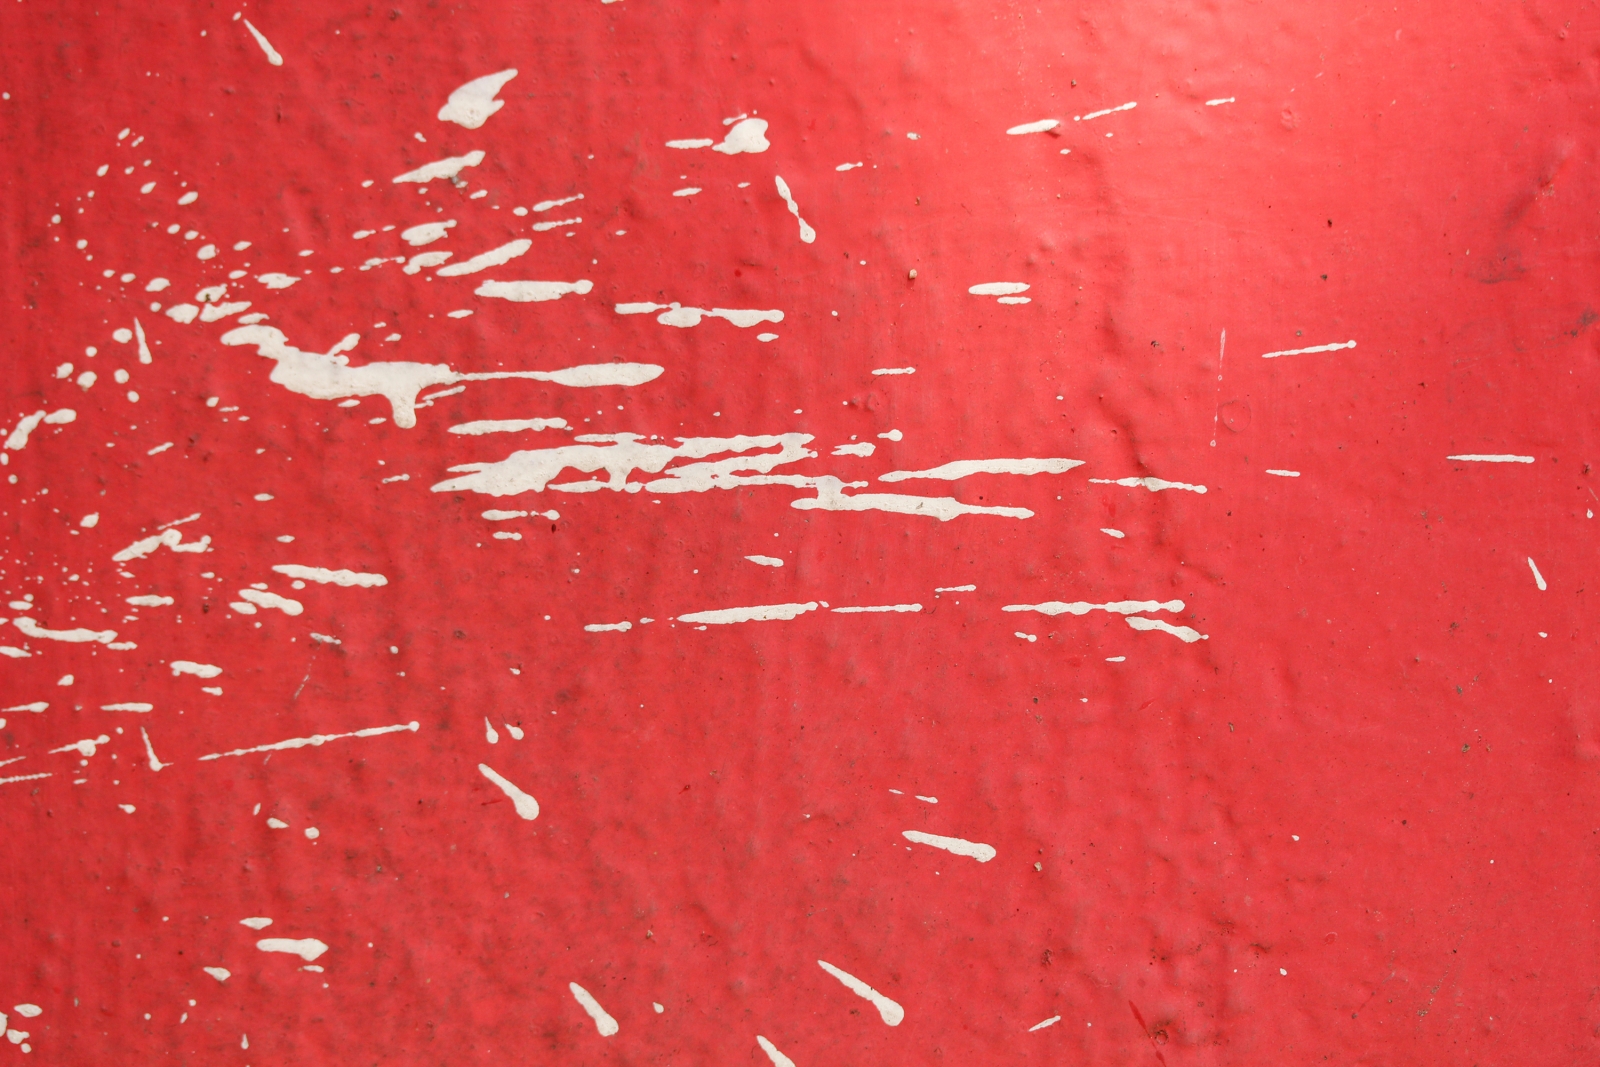 Paint Splash On A Red Wall Background Links Image